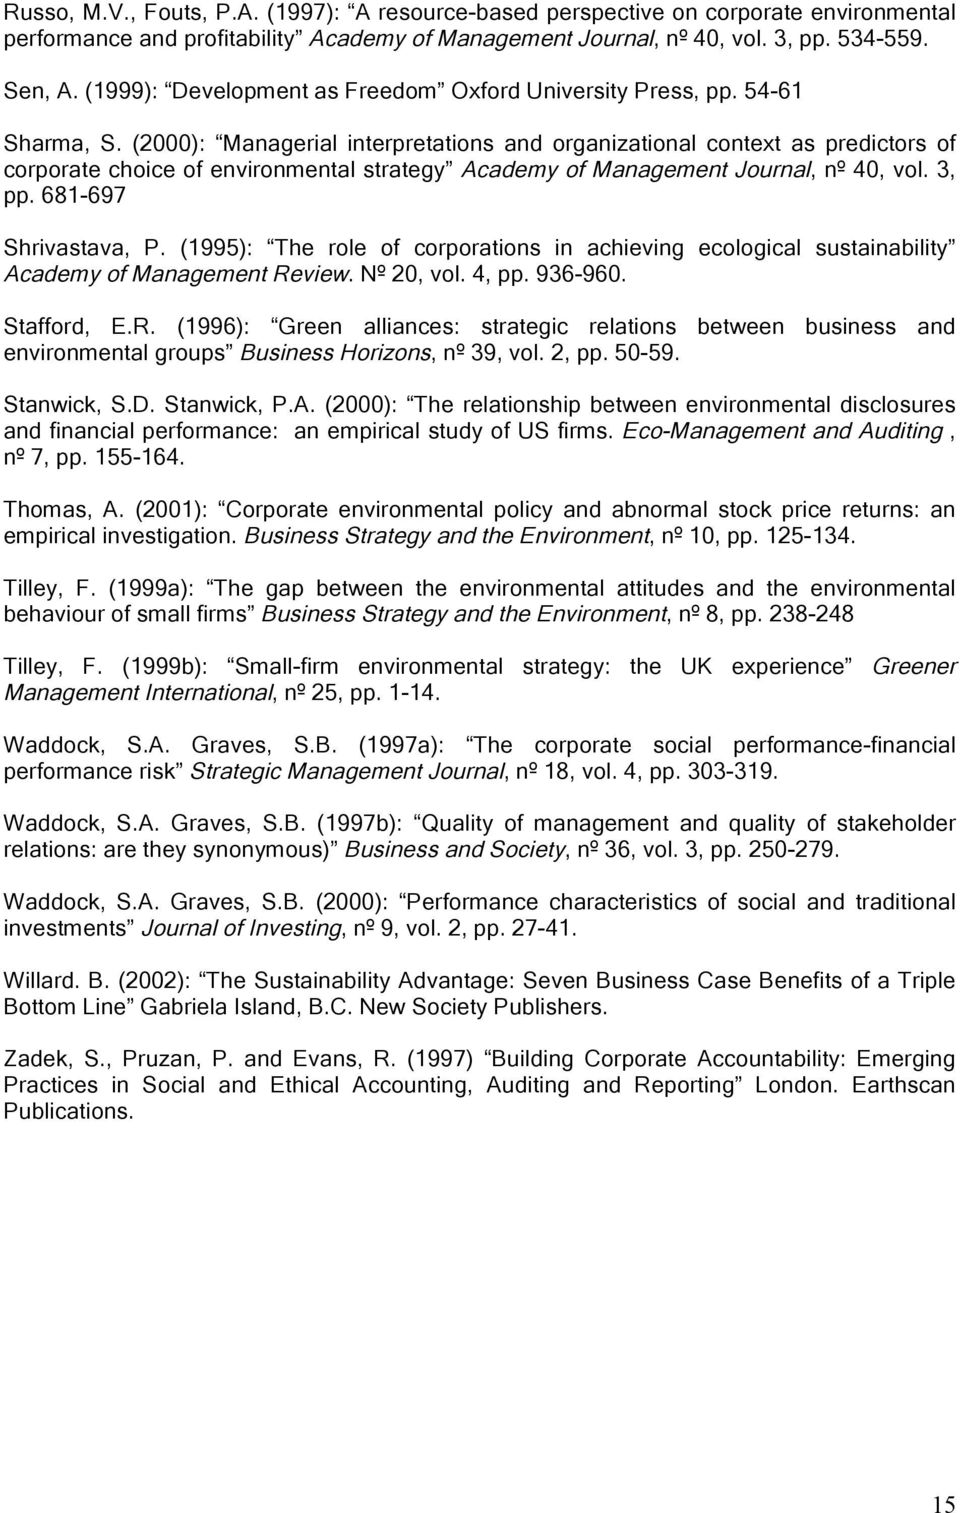 (2000): Managerial interpretations and organizational context as predictors of corporate choice of environmental strategy Academy of Management Journal, nº 40, vol. 3, pp. 681-697 Shrivastava, P.